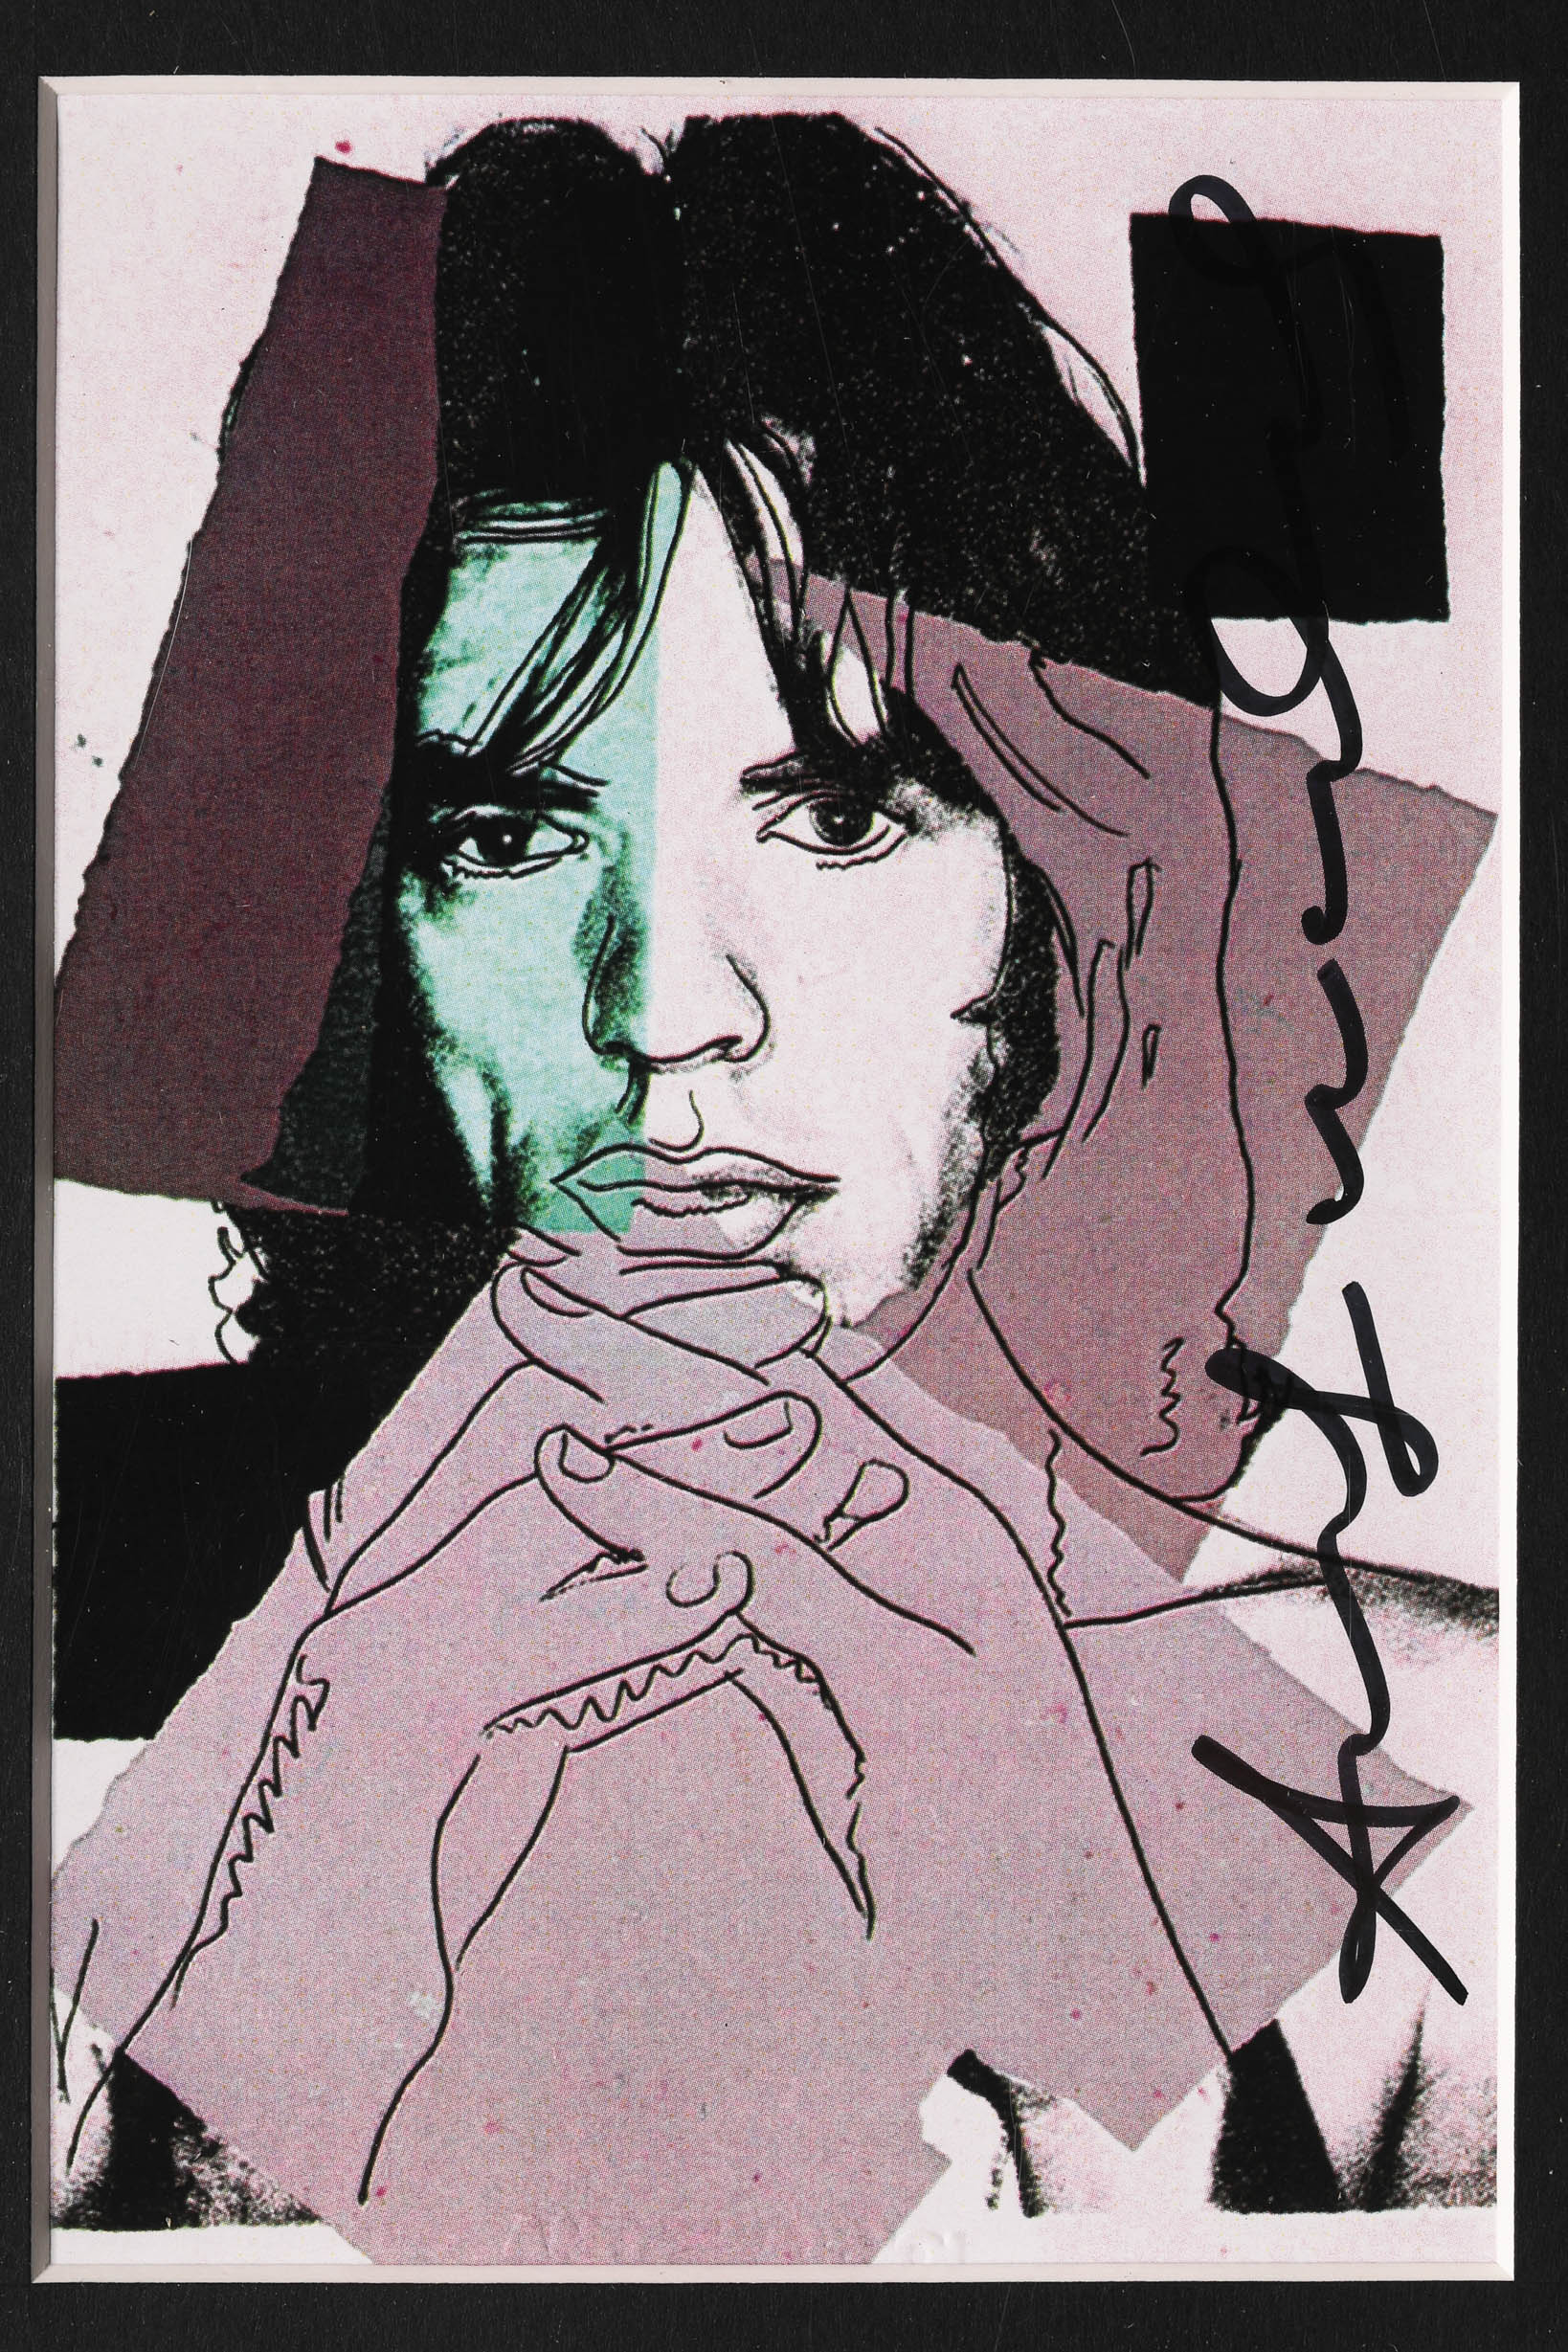 Andy Warhol, Mini Portfolio Mick Jagger with 10 Prints, 1975, signed - Image 9 of 16